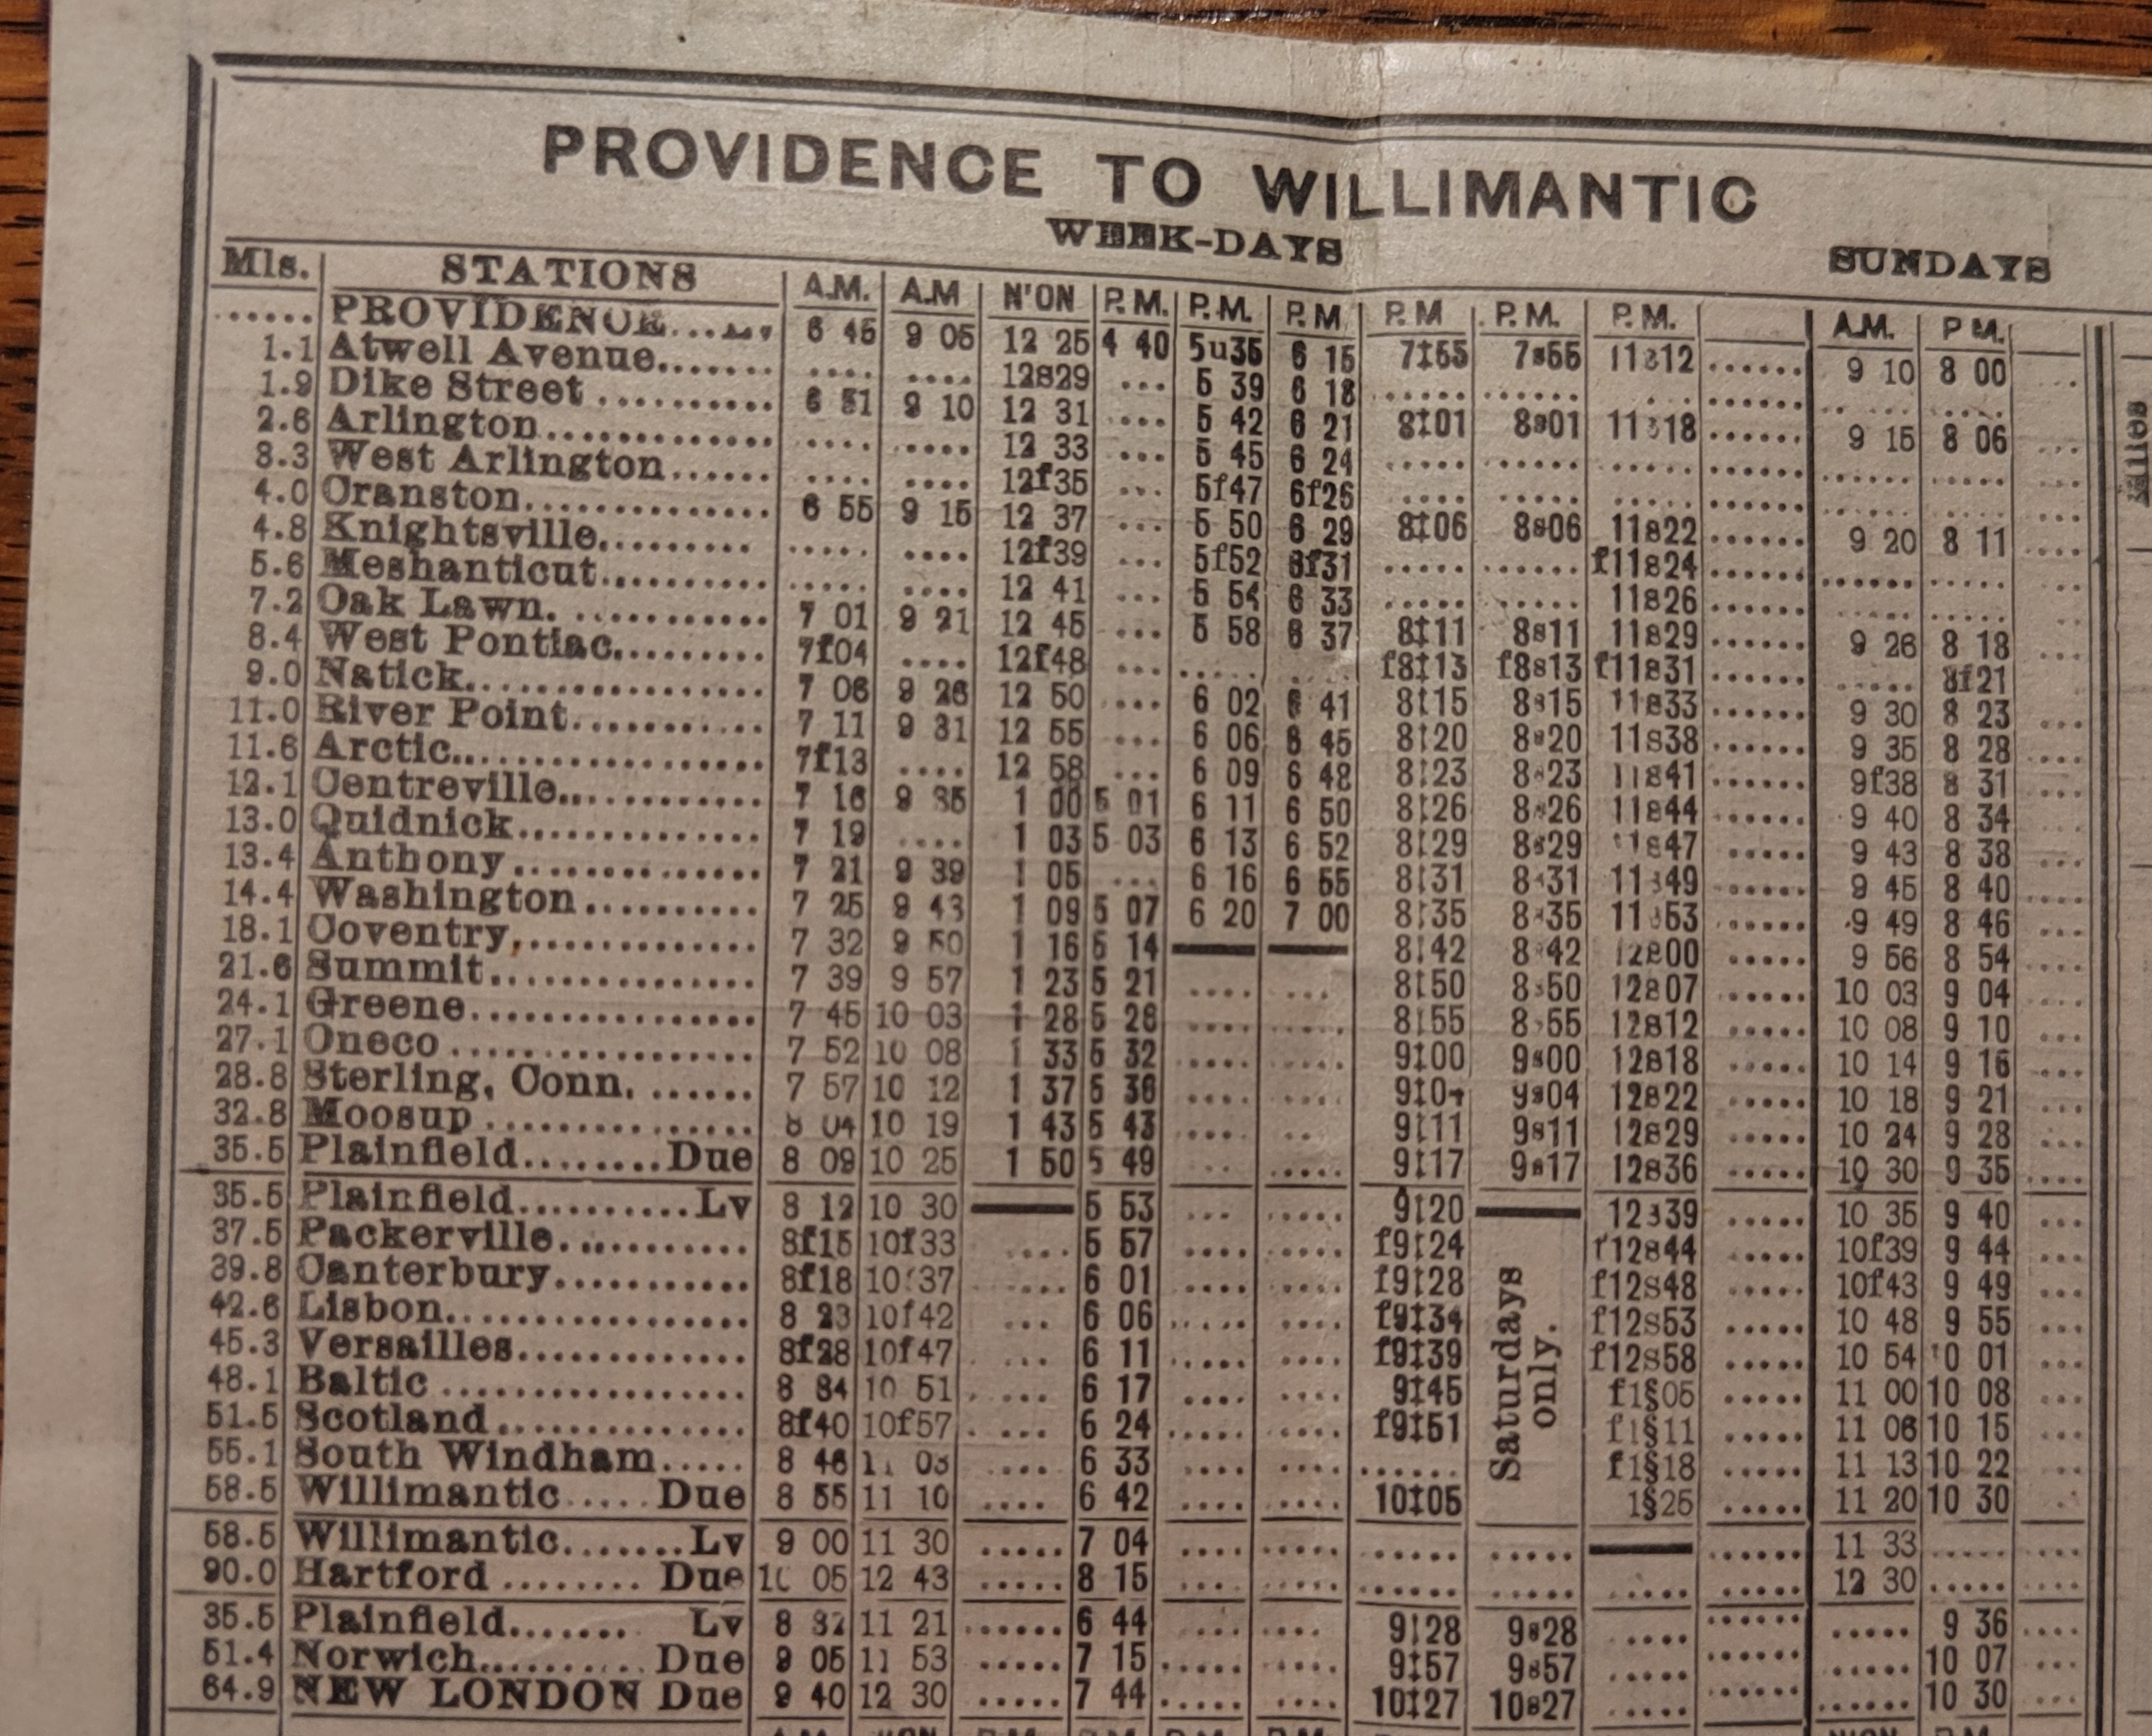 Station Stops Between Providence and Willimantic on the line as of March 2, 1913